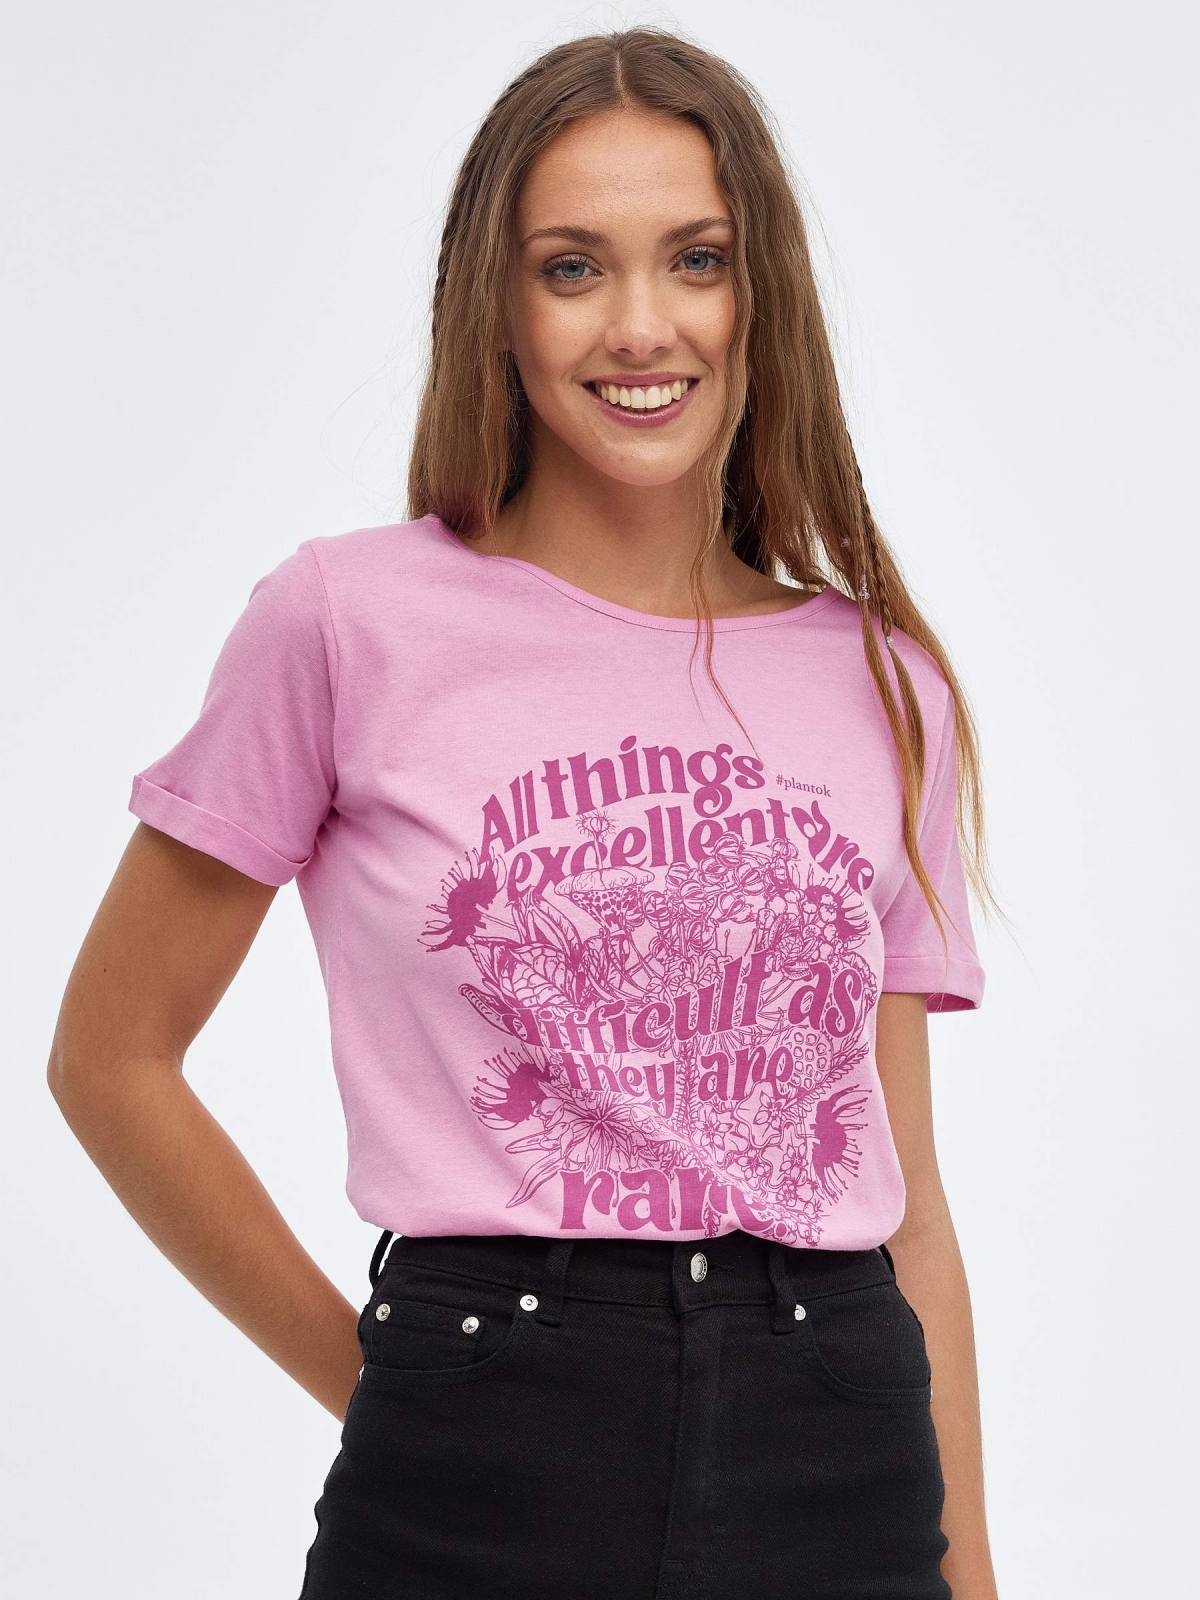 All Things Excellent T-shirt pink middle front view